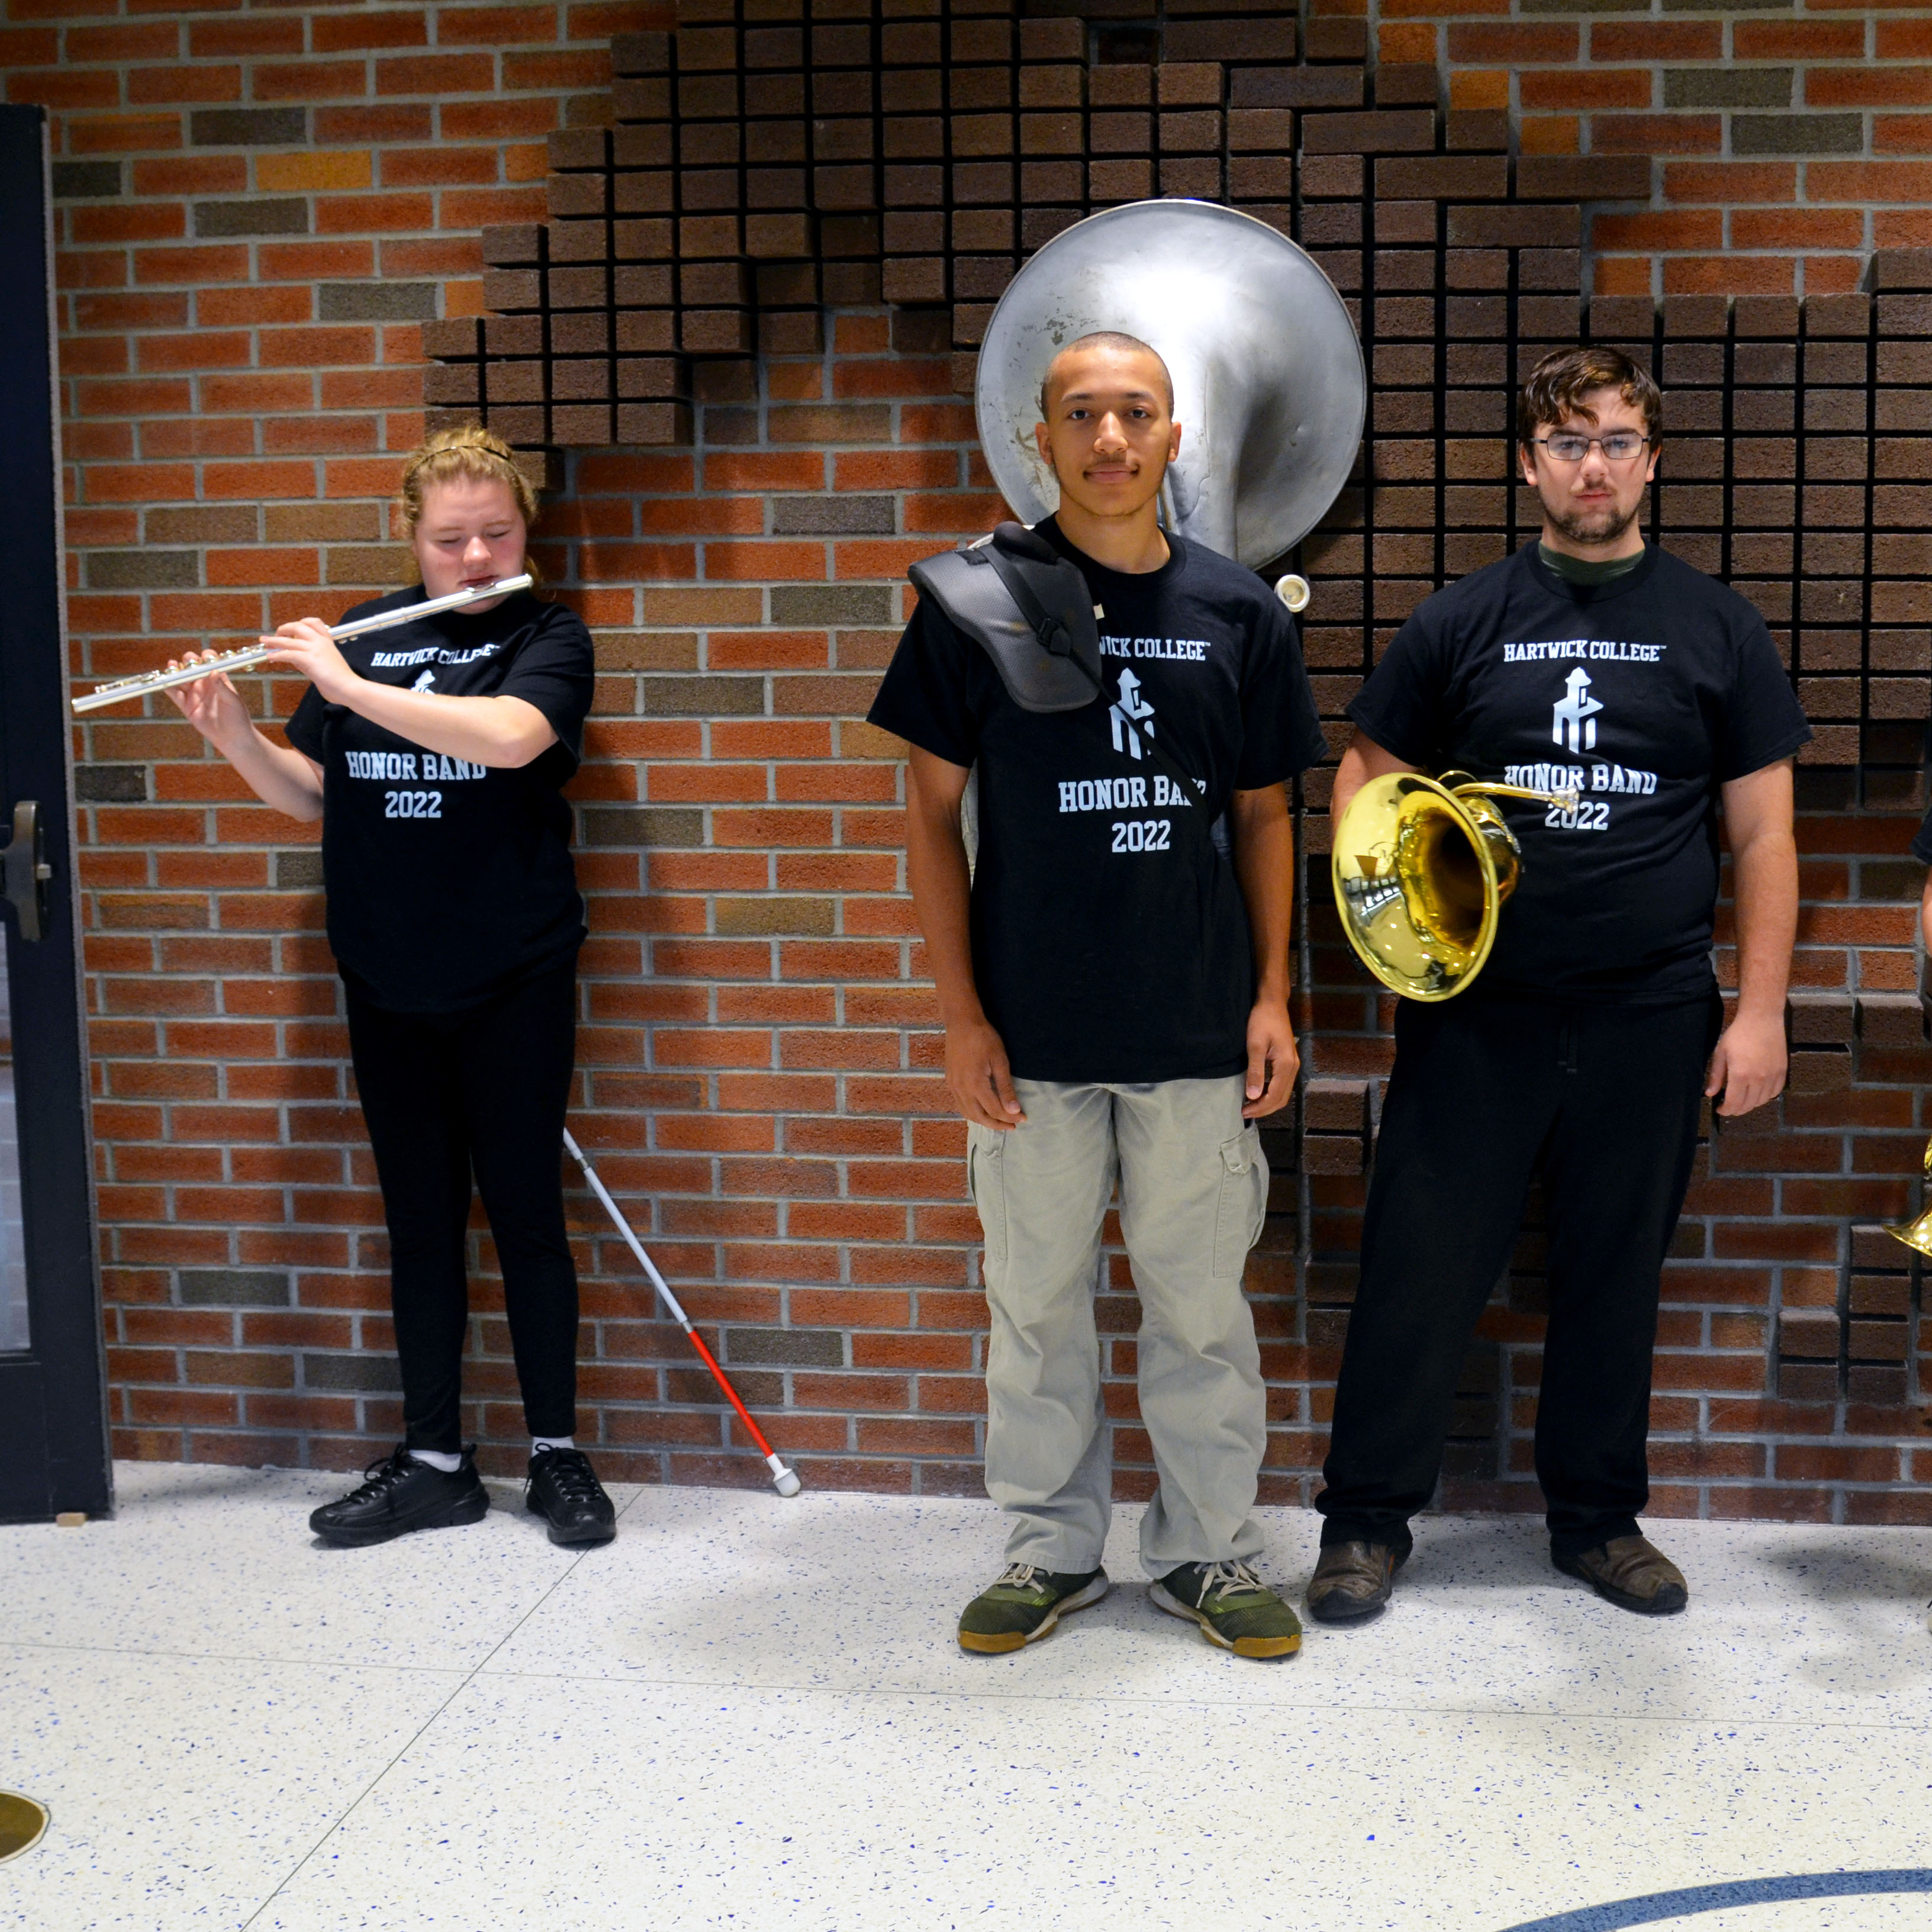 Honor Band poses for a photo